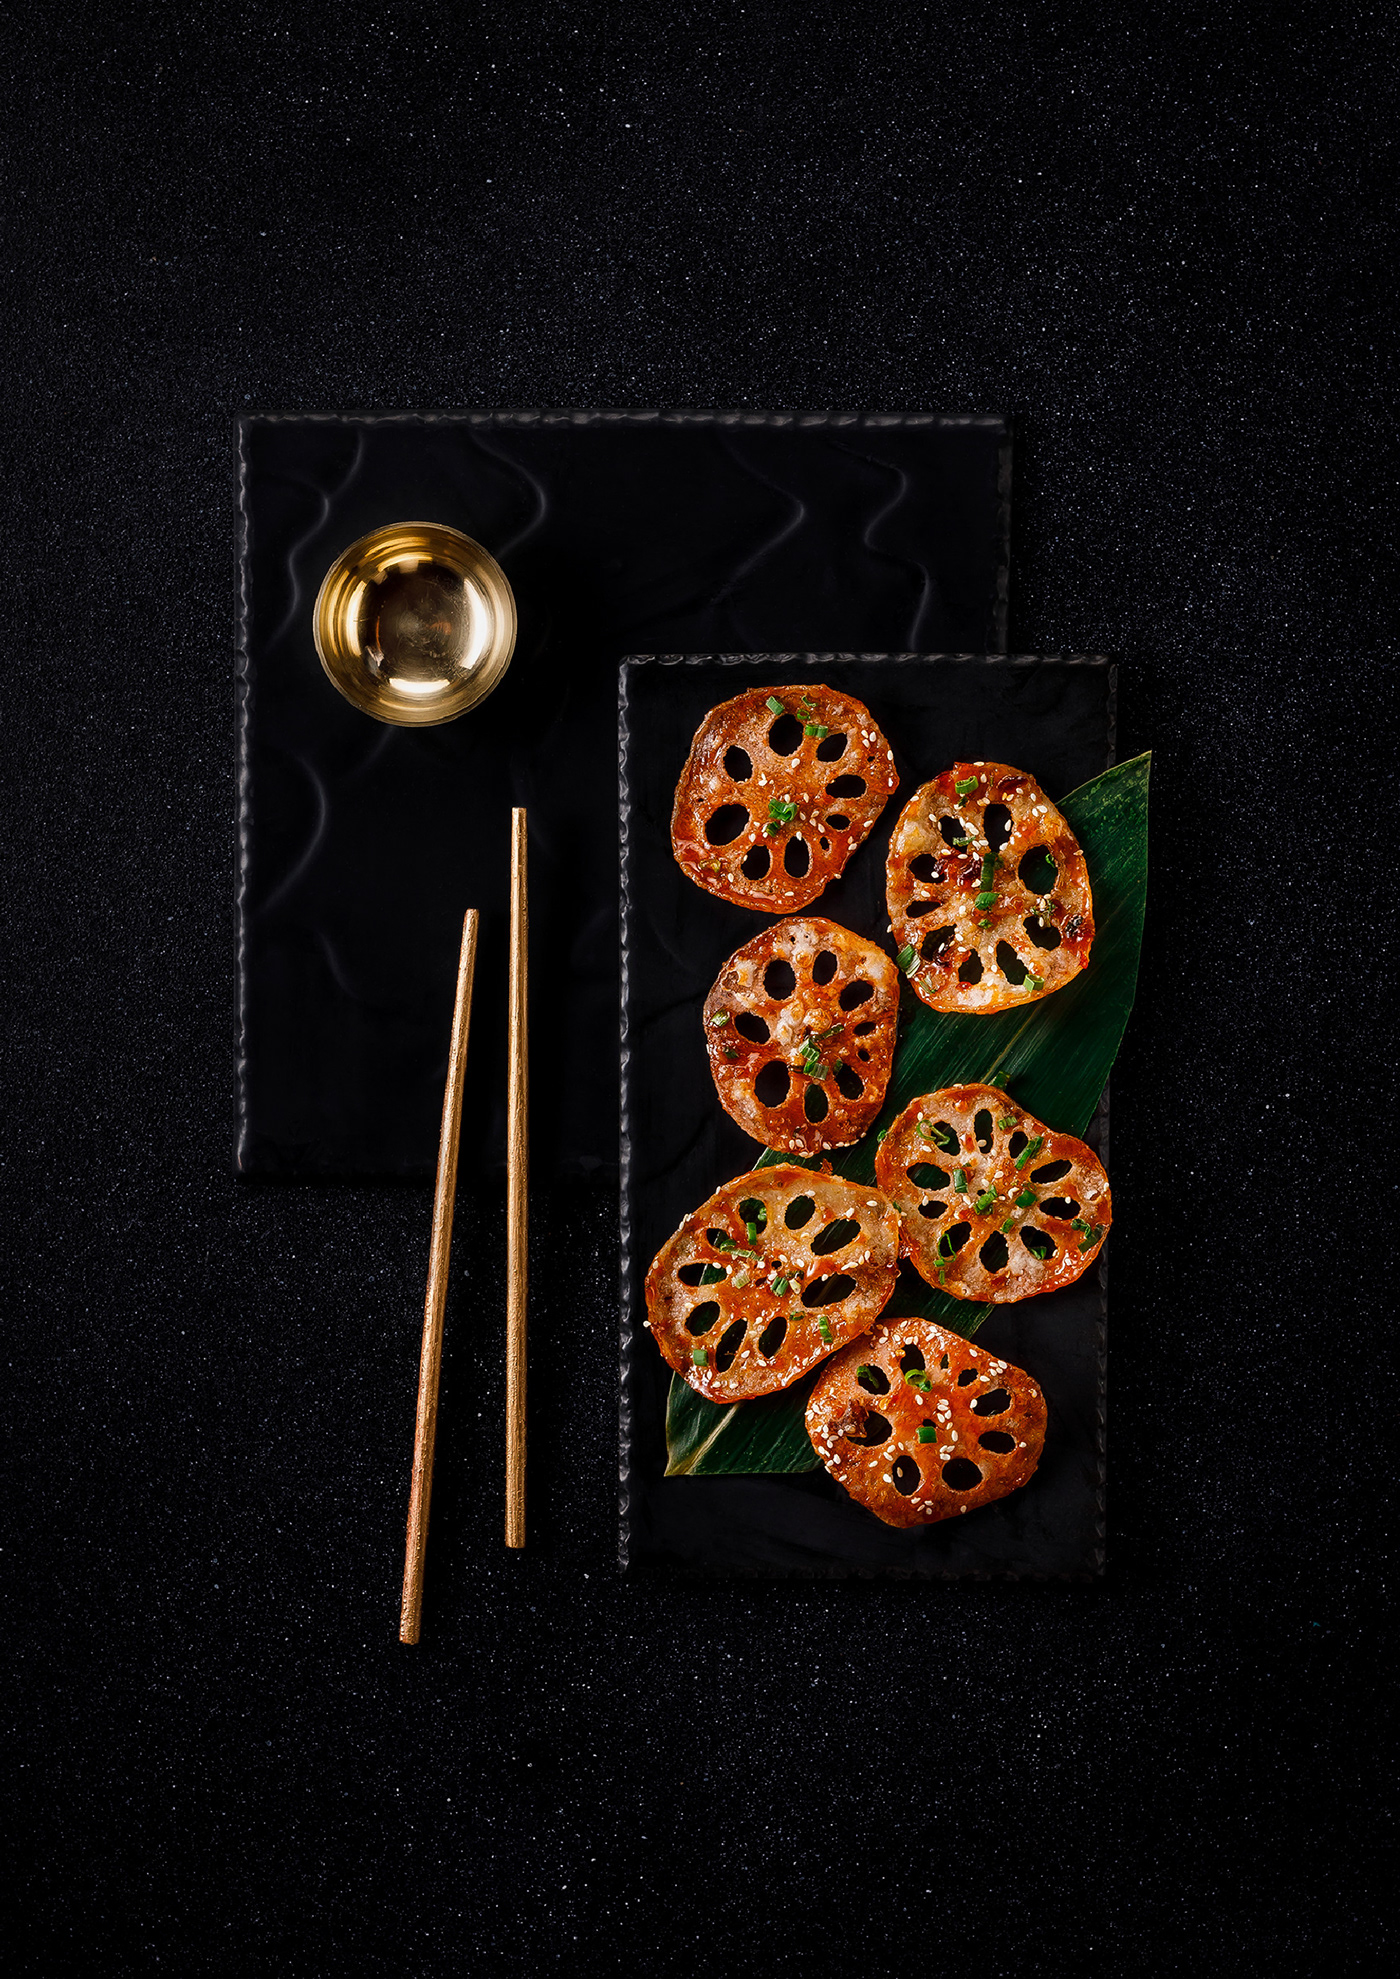 food photography Restaurant Branding Asian Food food styling Black Photography classy photoshoot food stylist concept photography classy branding